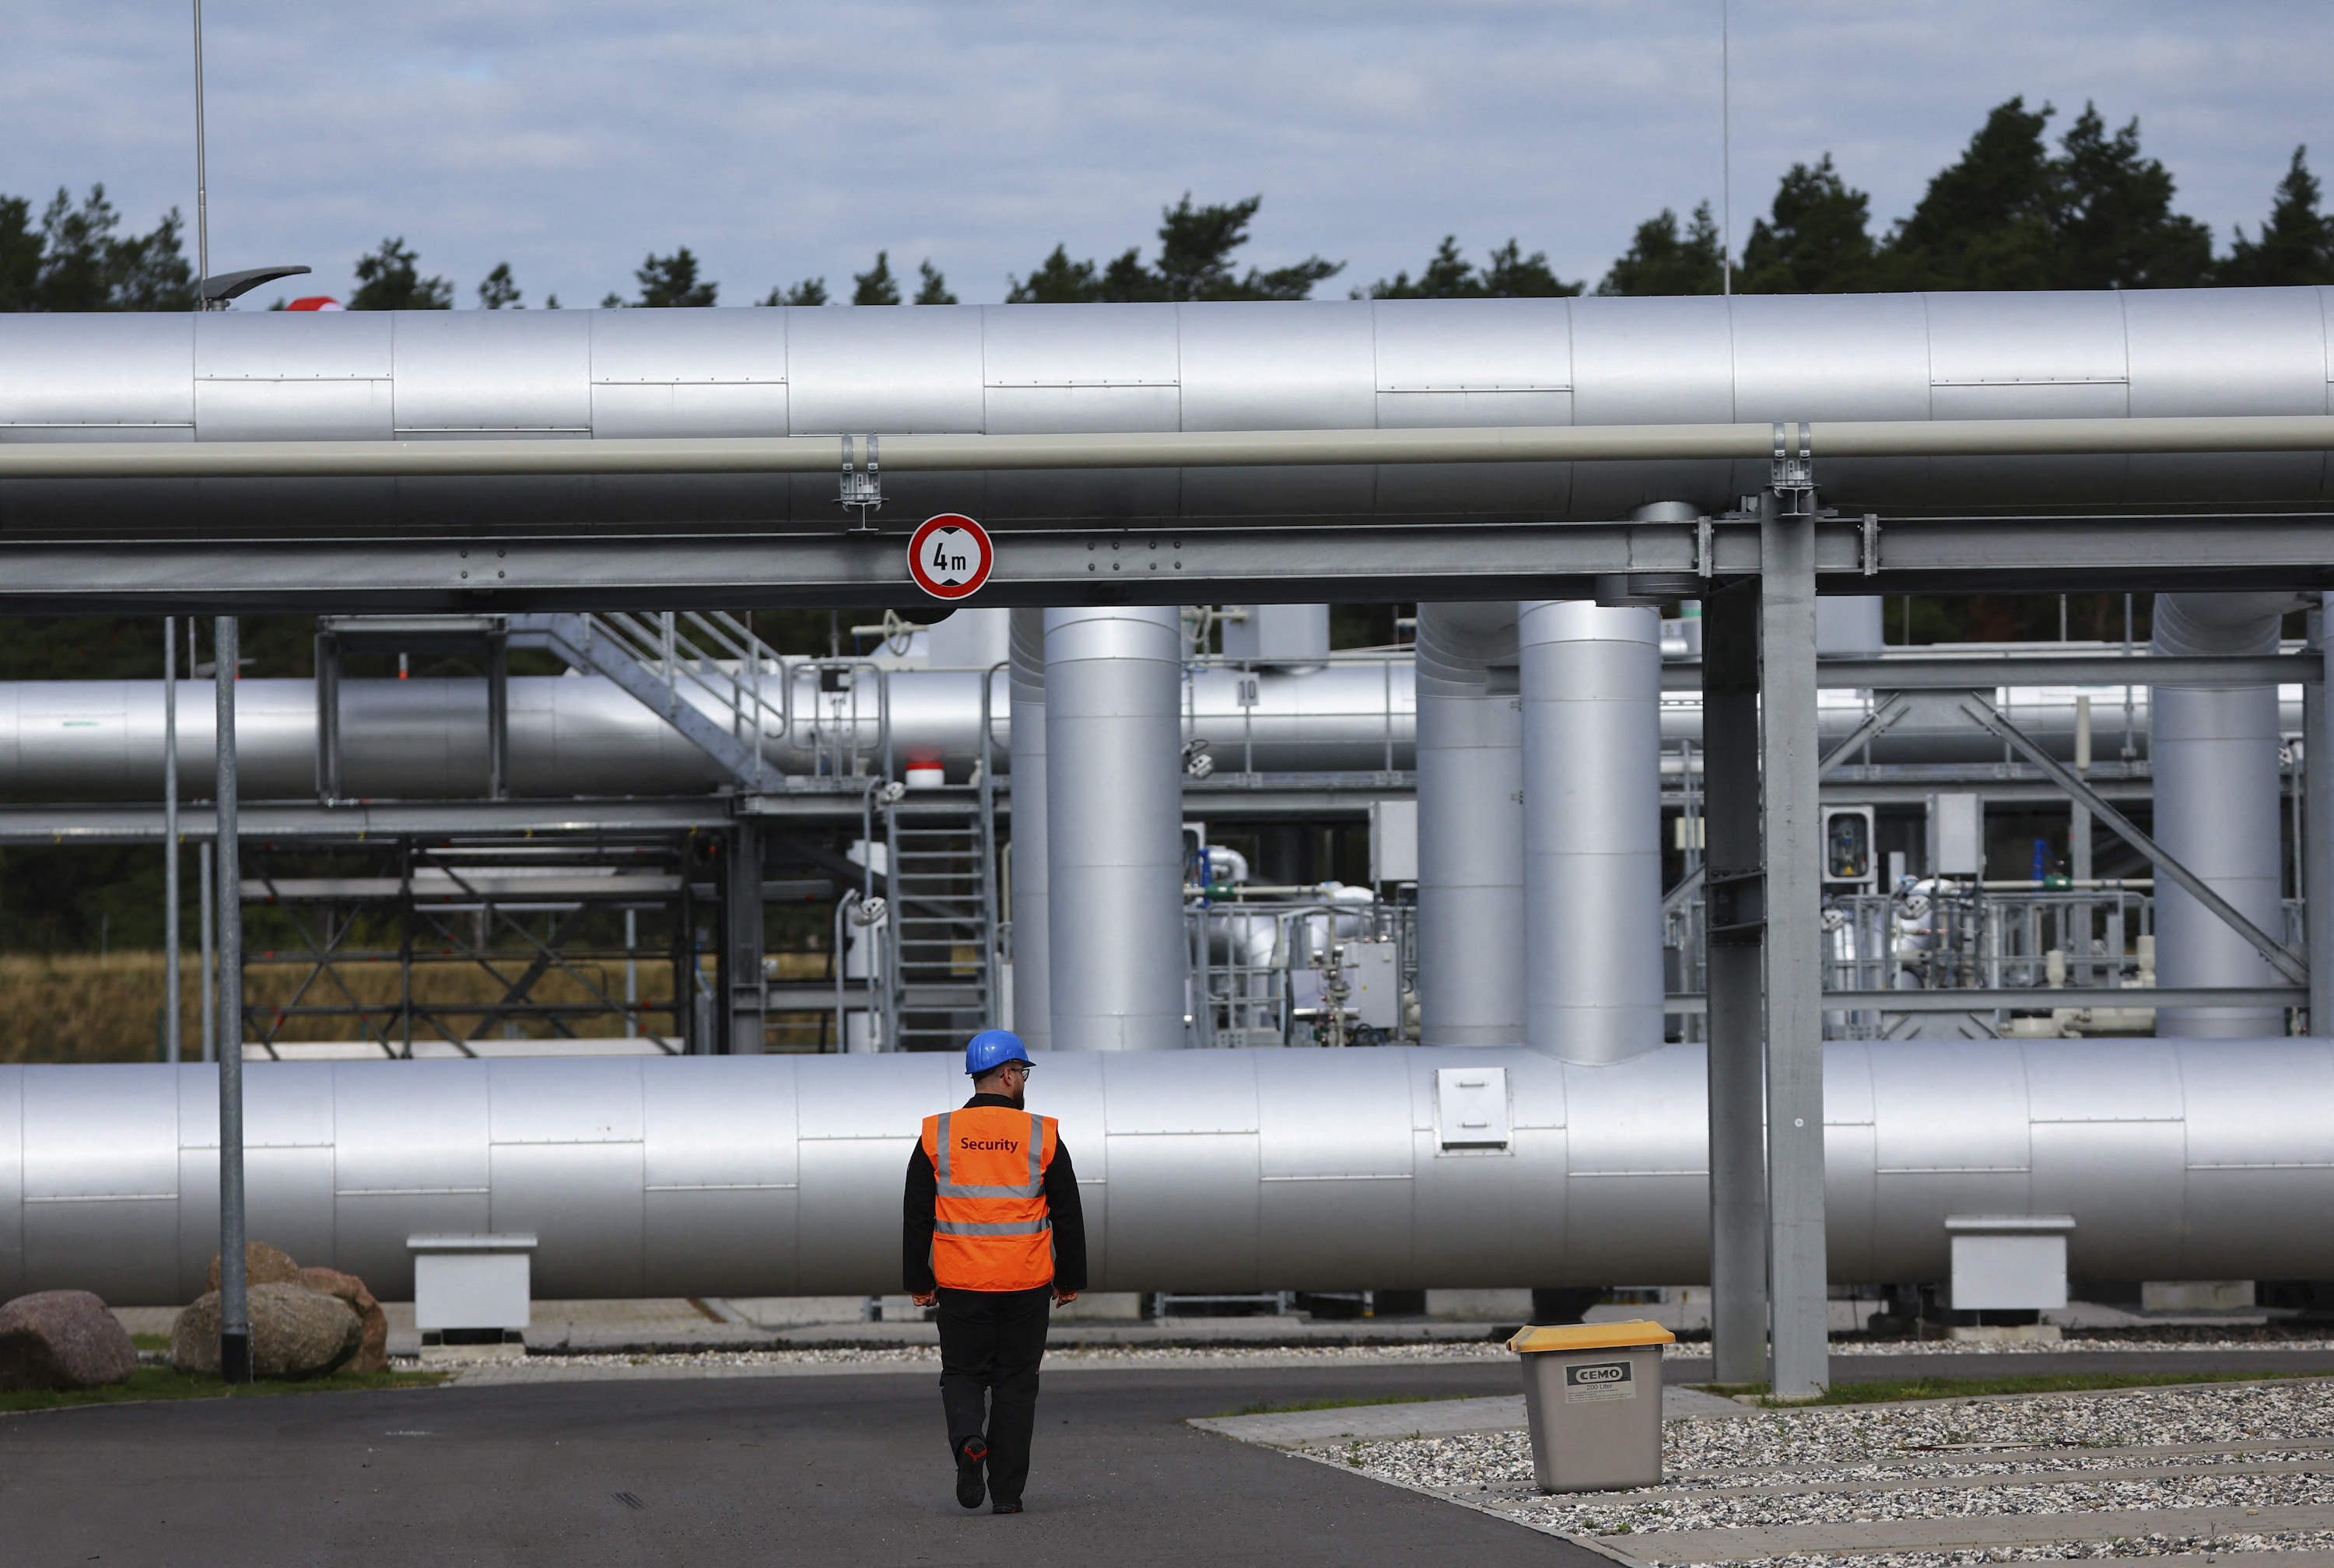 Security walks in front of the landfall facility of the Nord Stream 2 pipeline in Lubmin, Germany on September 19.